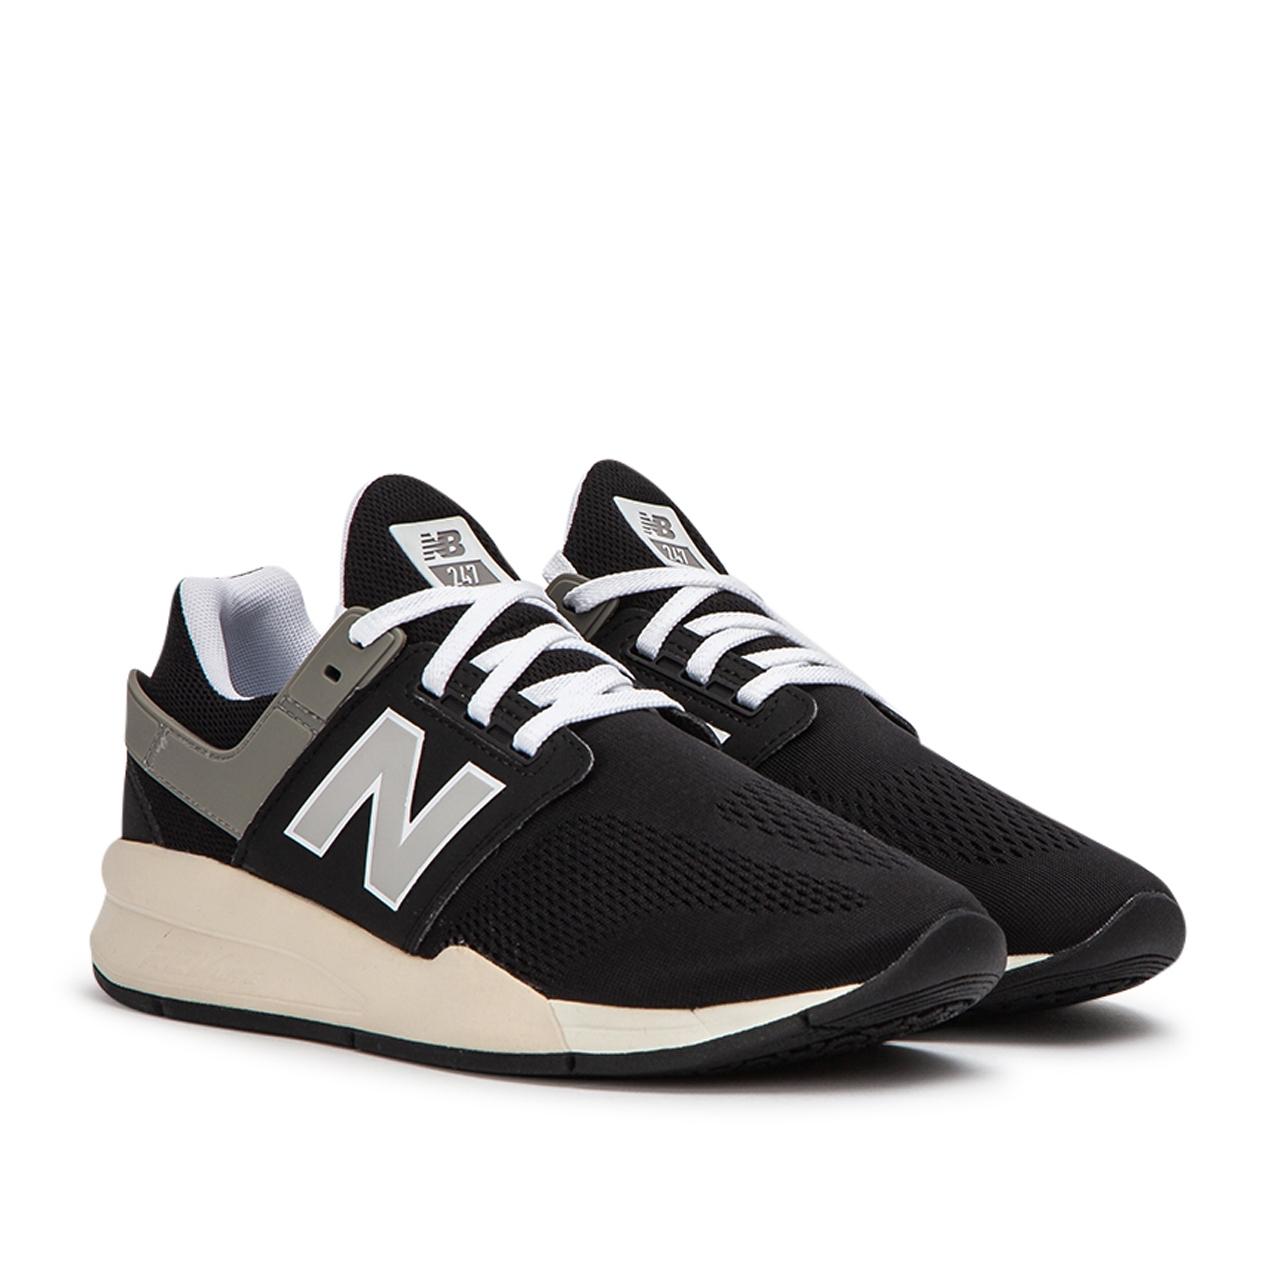 New Balance Synthetic Ms 247 Mr in 